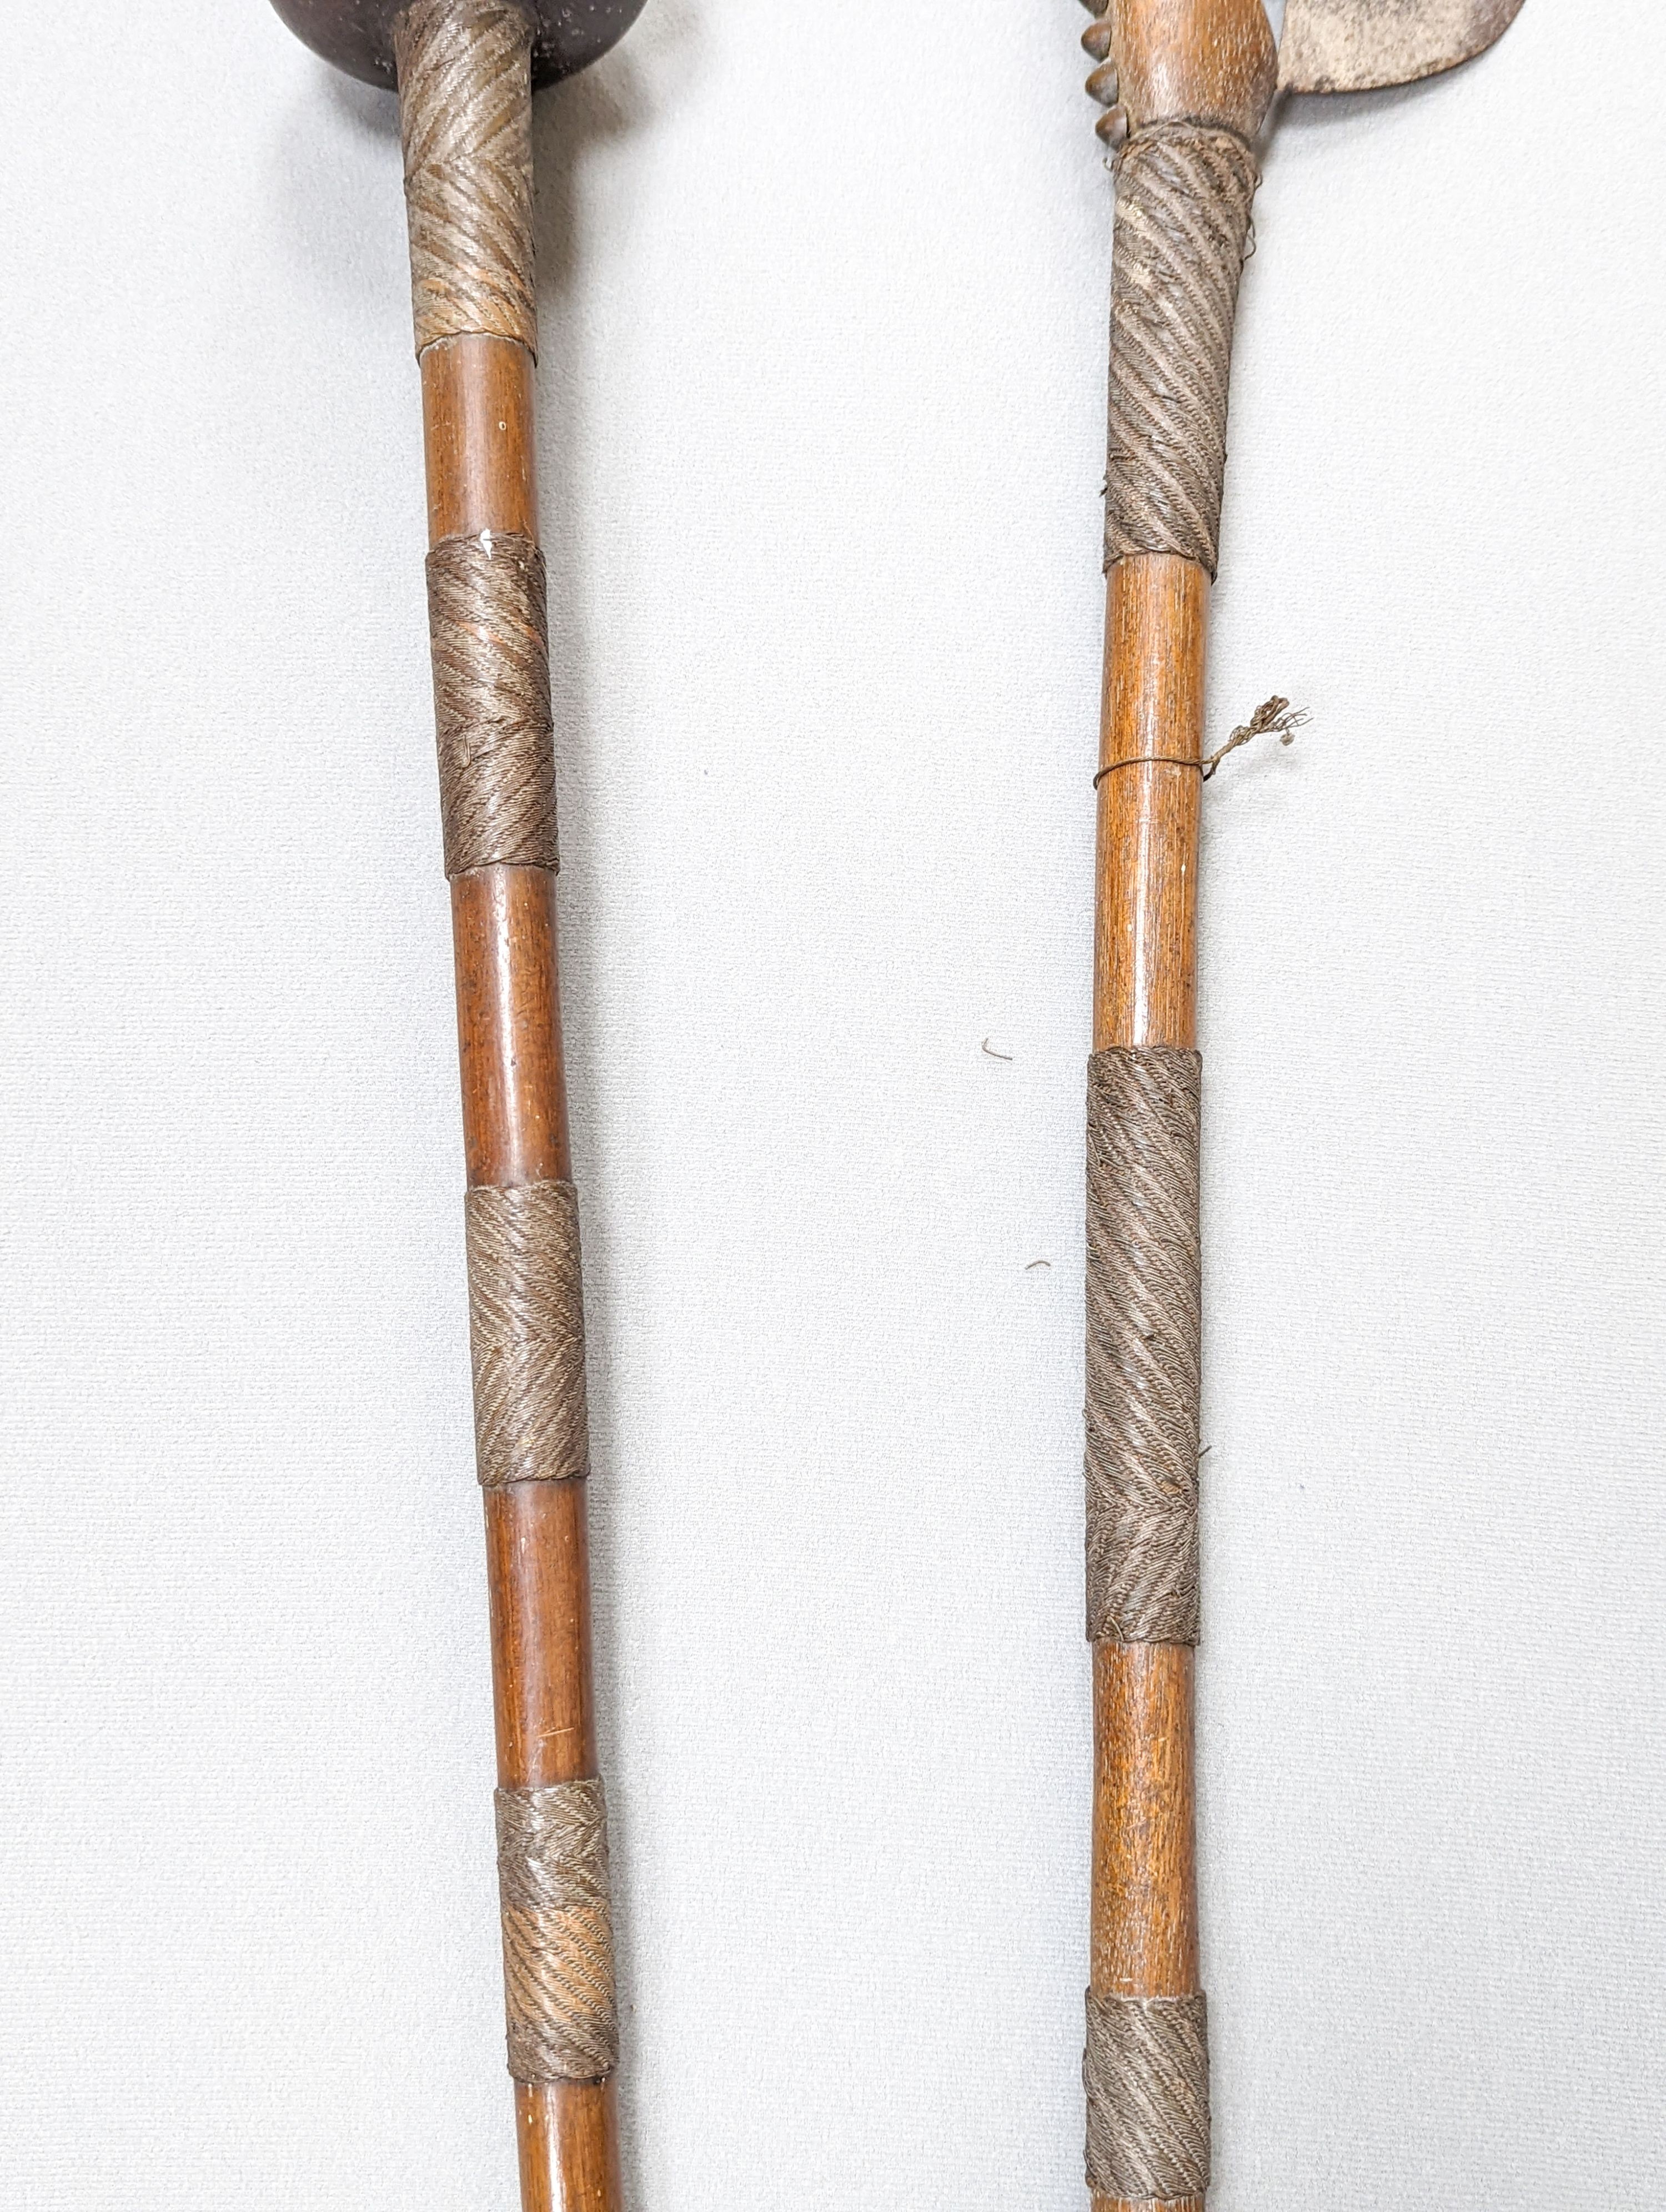 A Zulu hardwood, braided wire and studded knobkerrie and a similar axe 79cm